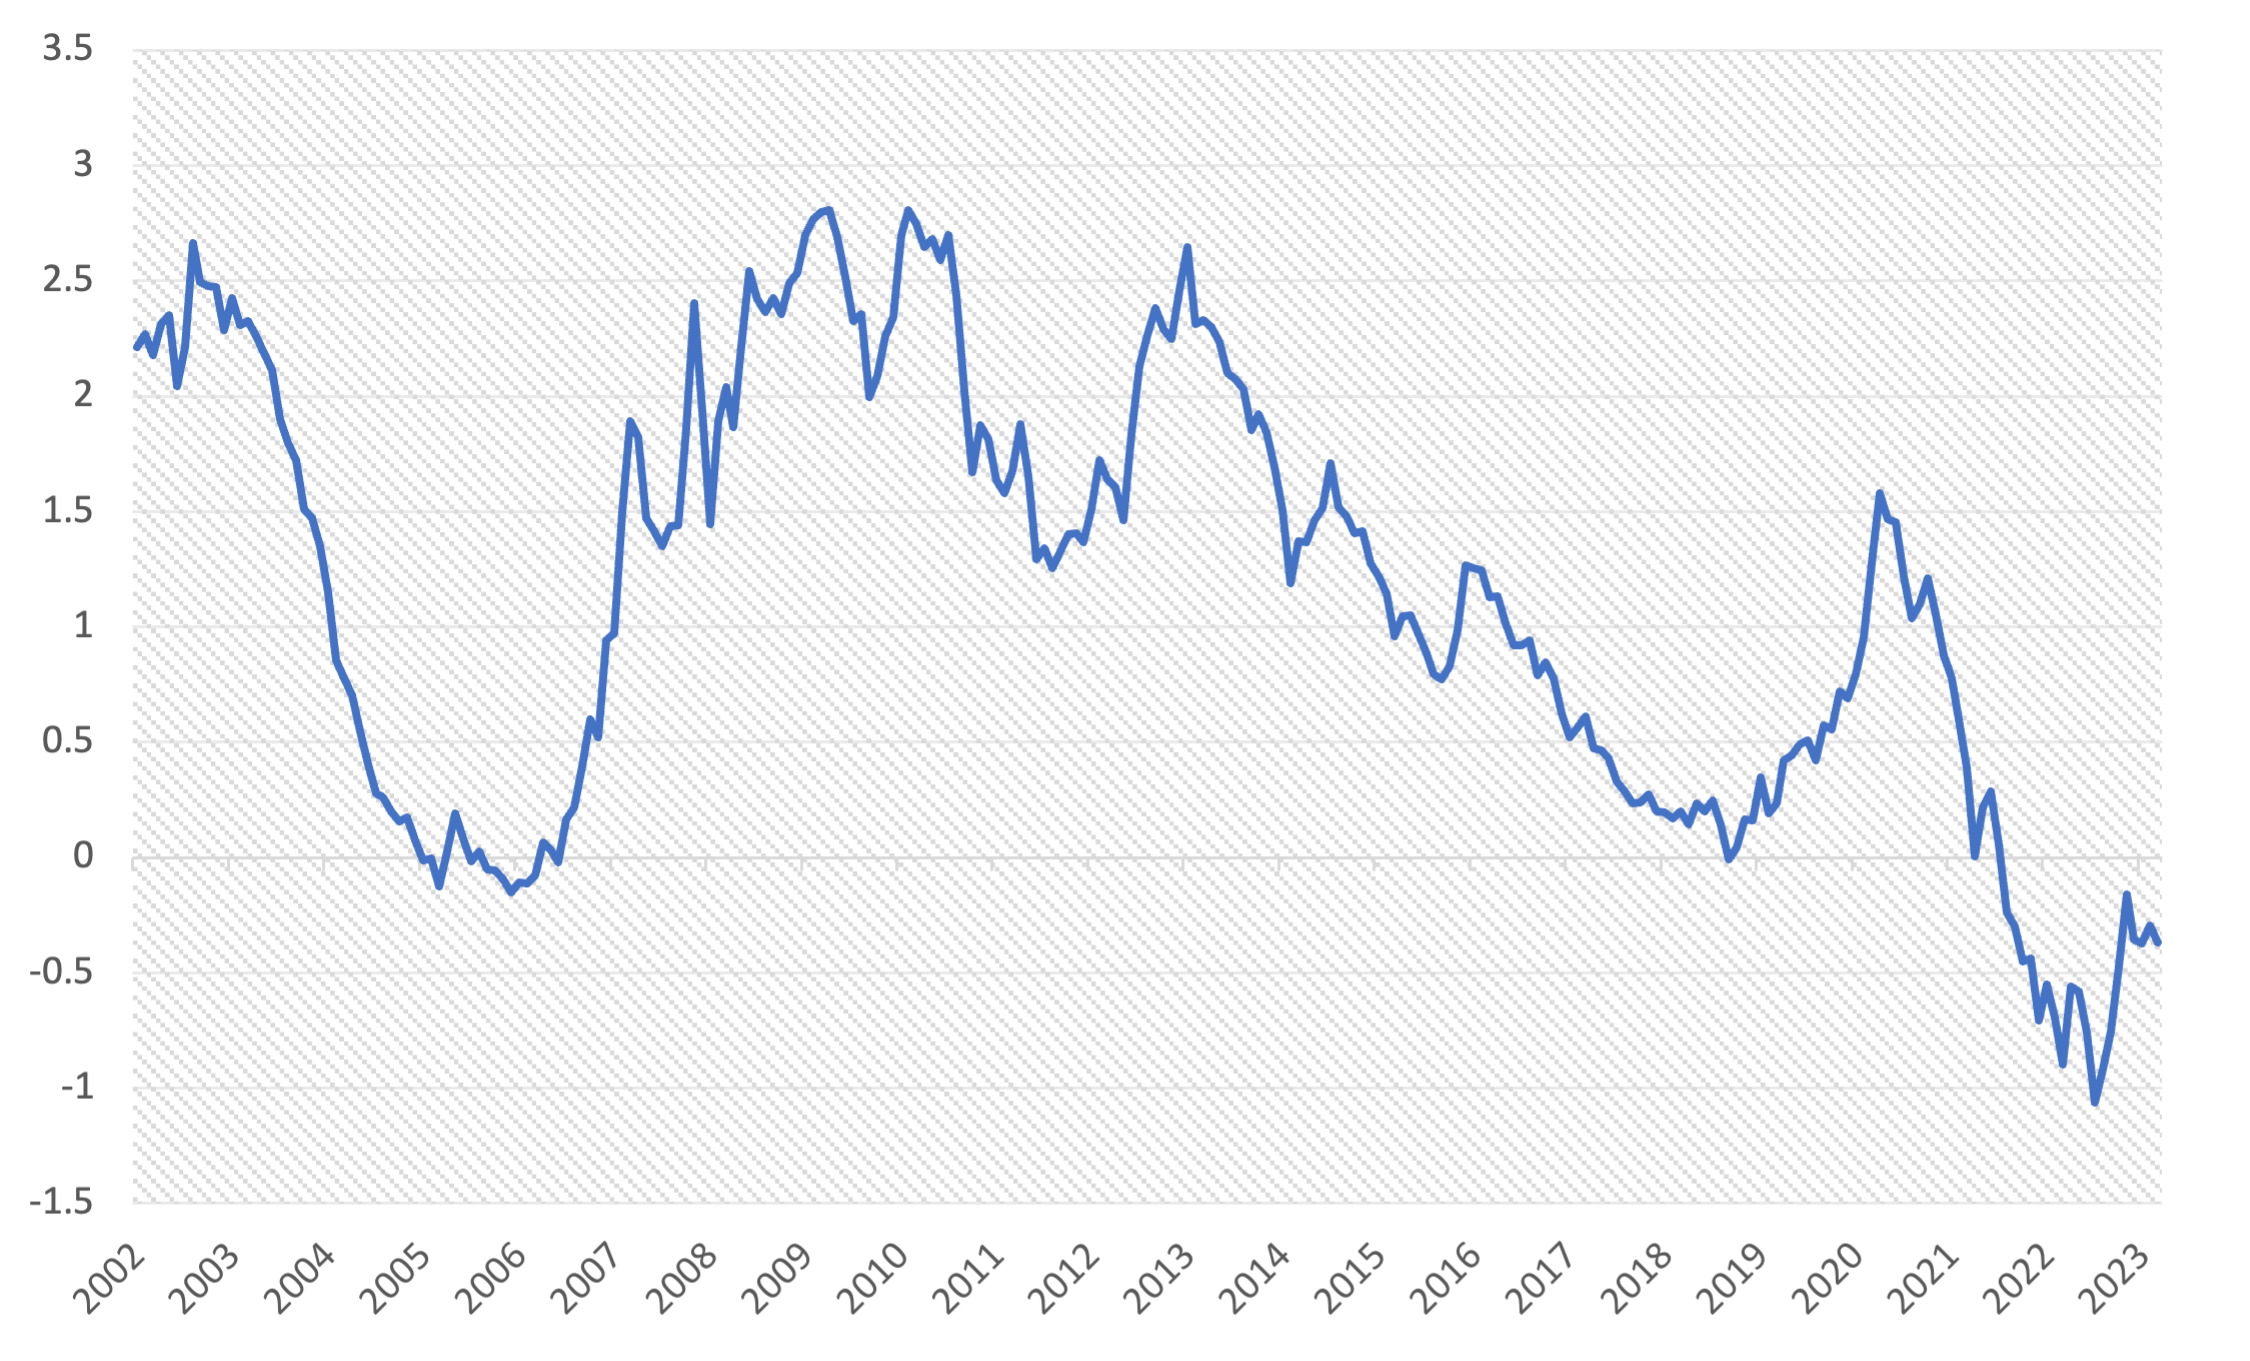 Chart of US Treasury – Yield Spread between 2 and 10 year notes